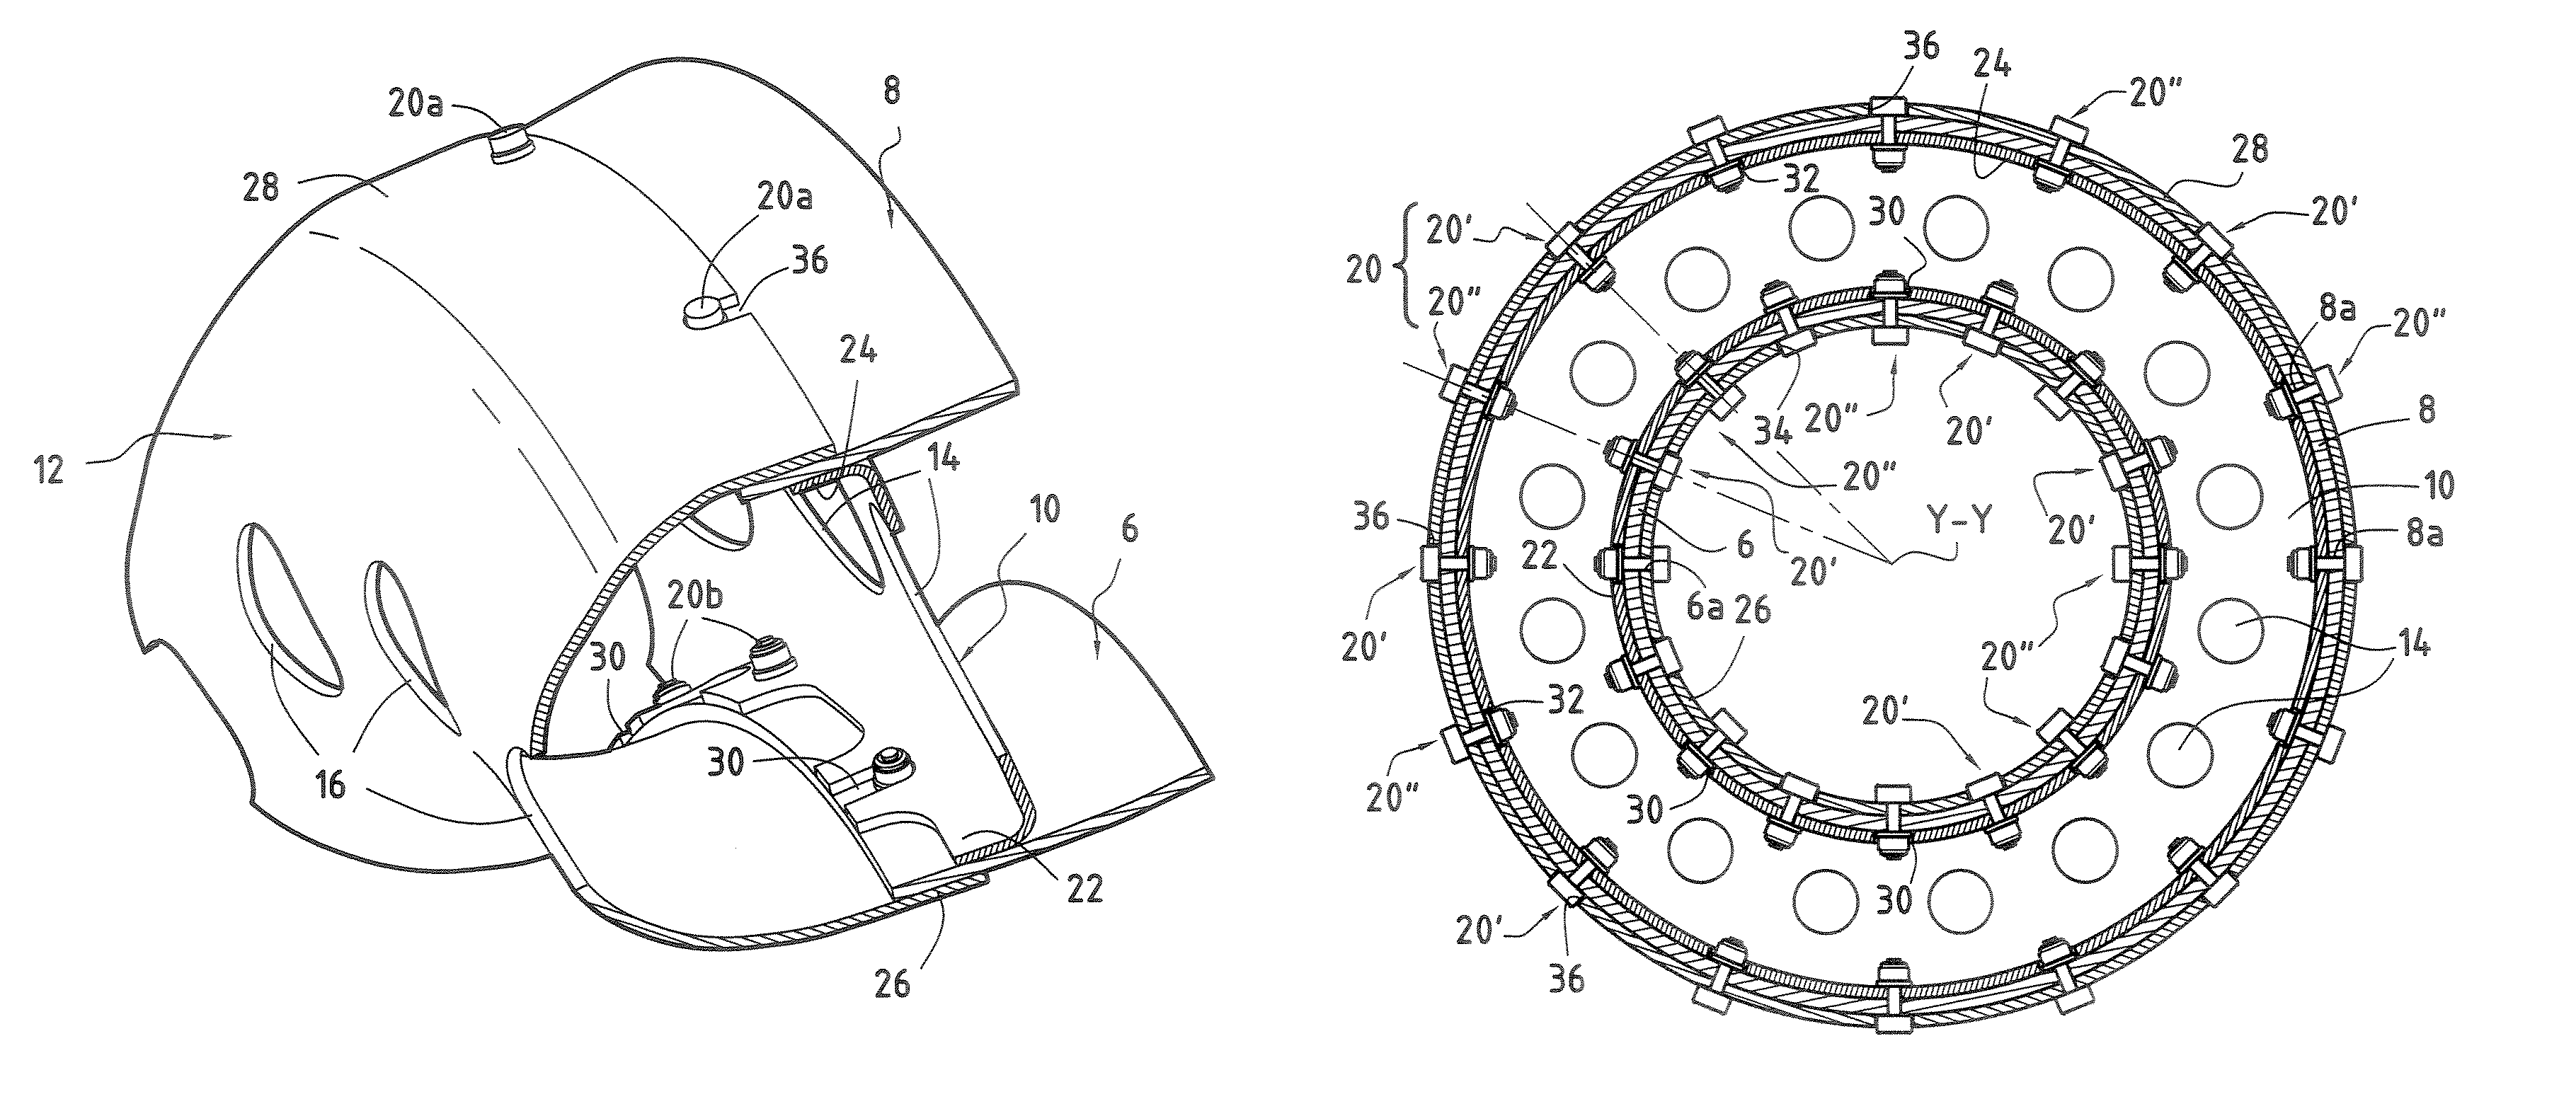 Turbine engine annular combustion chamber with alternate fixings